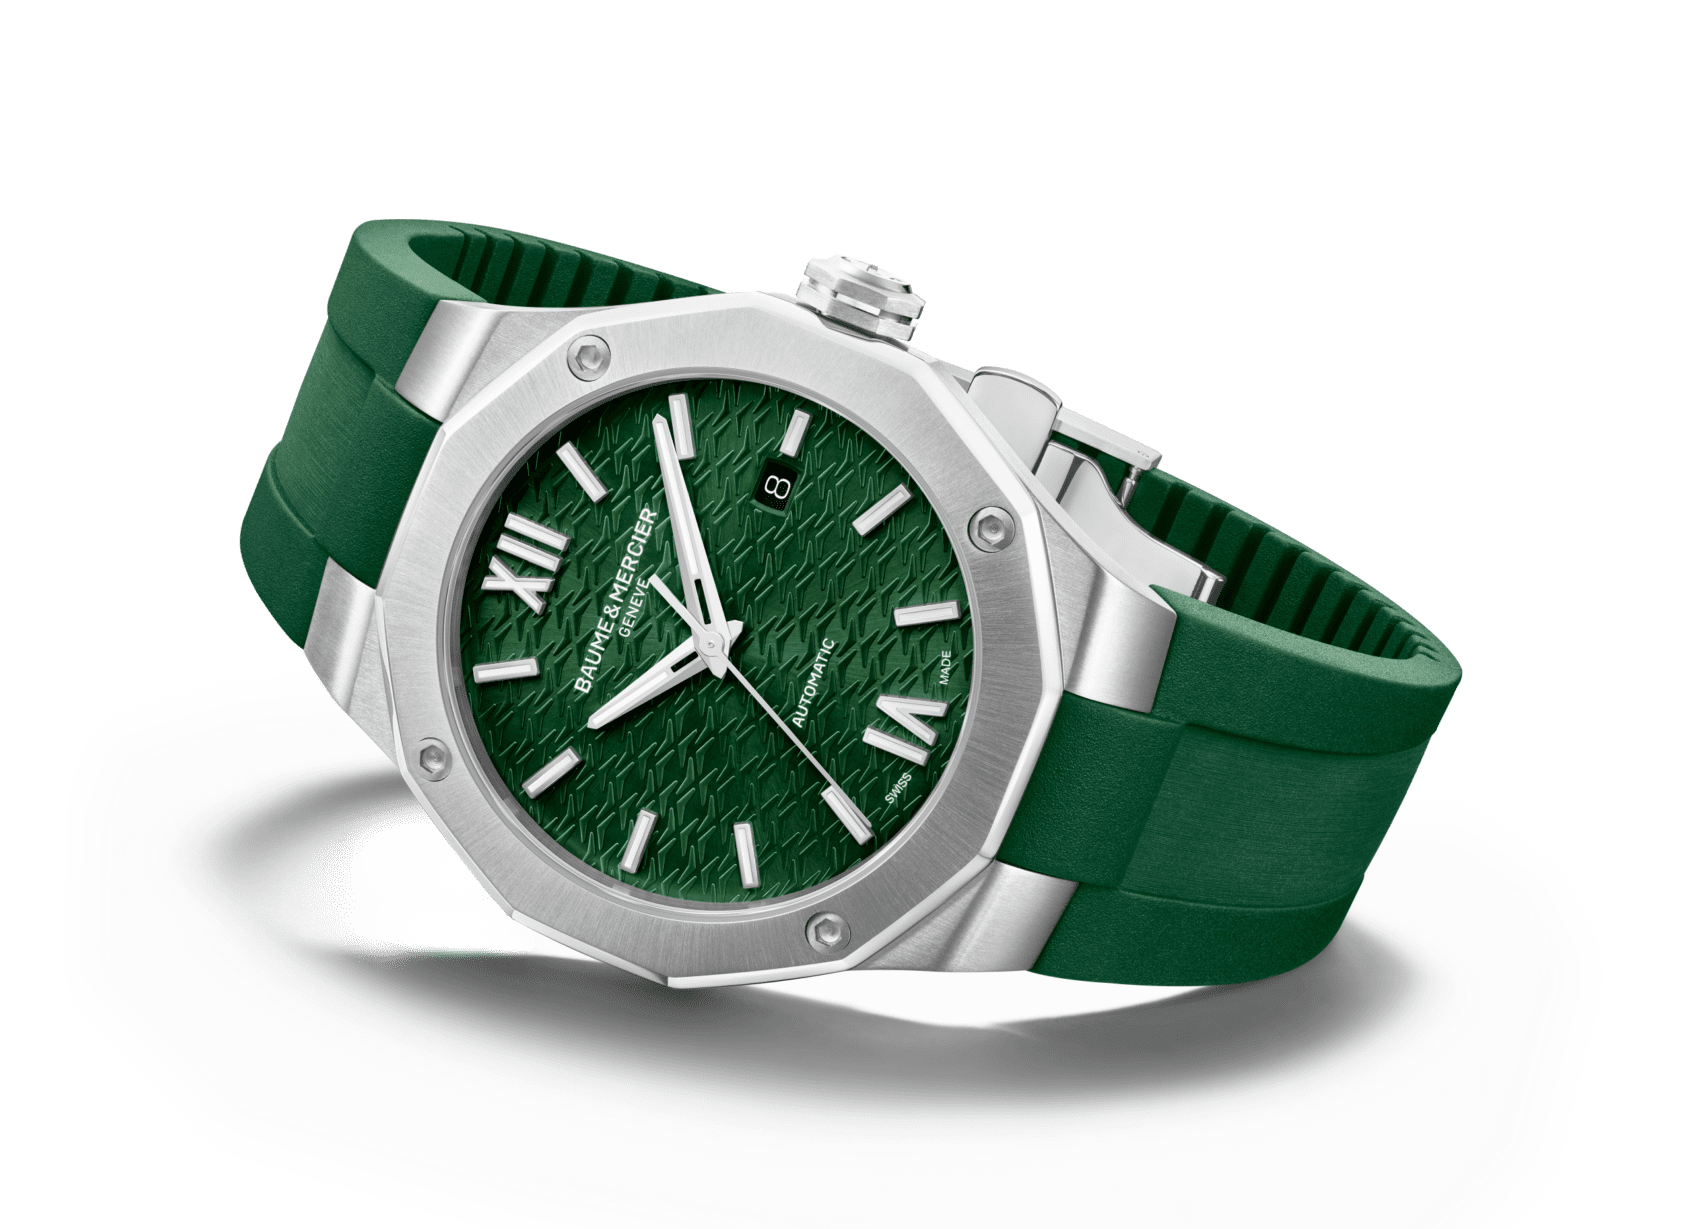 The Baume & Mercier Riviera joins the green party